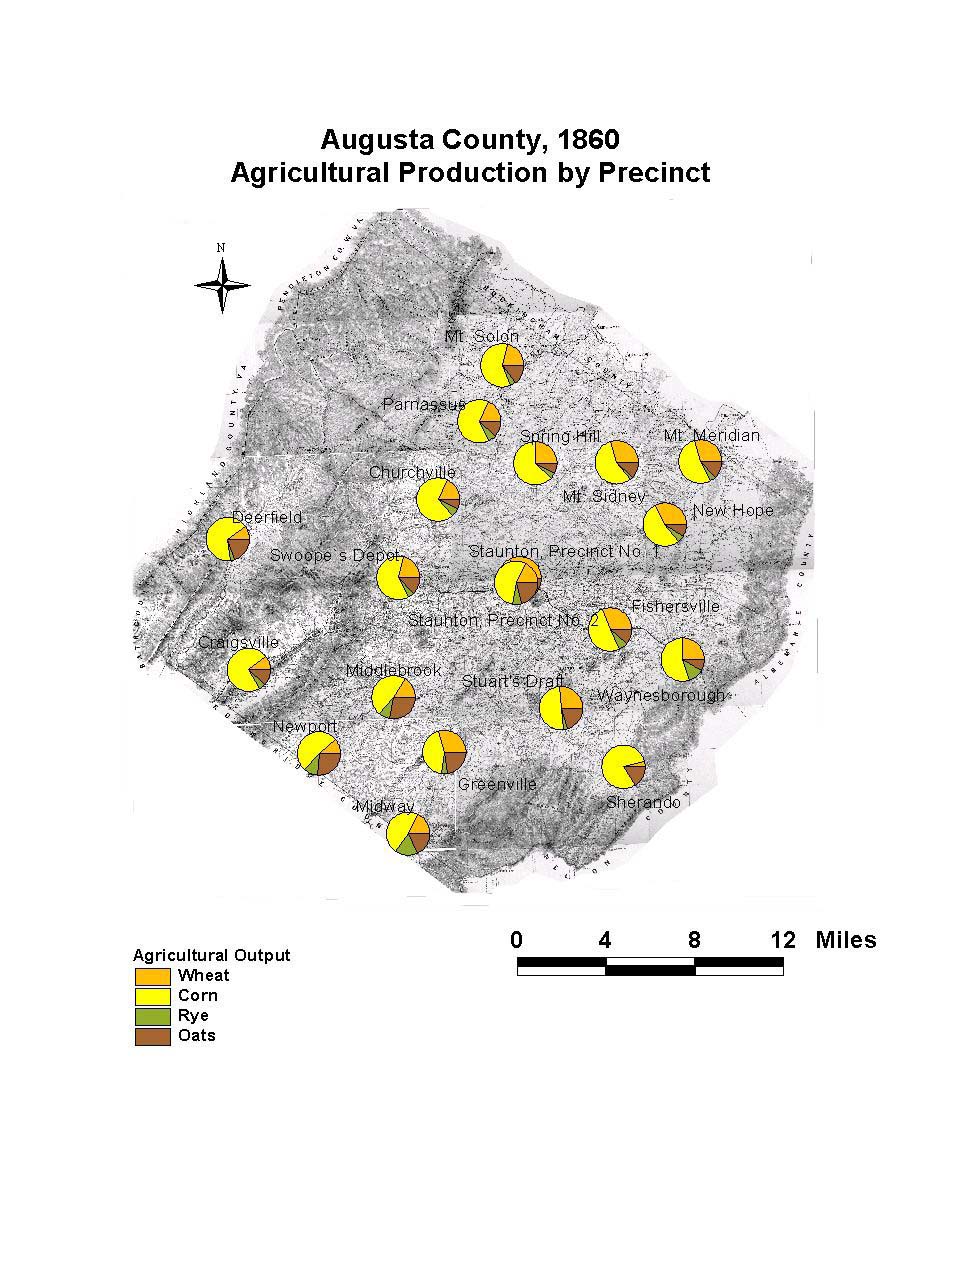 Agricultural Production by Precinct, 1860